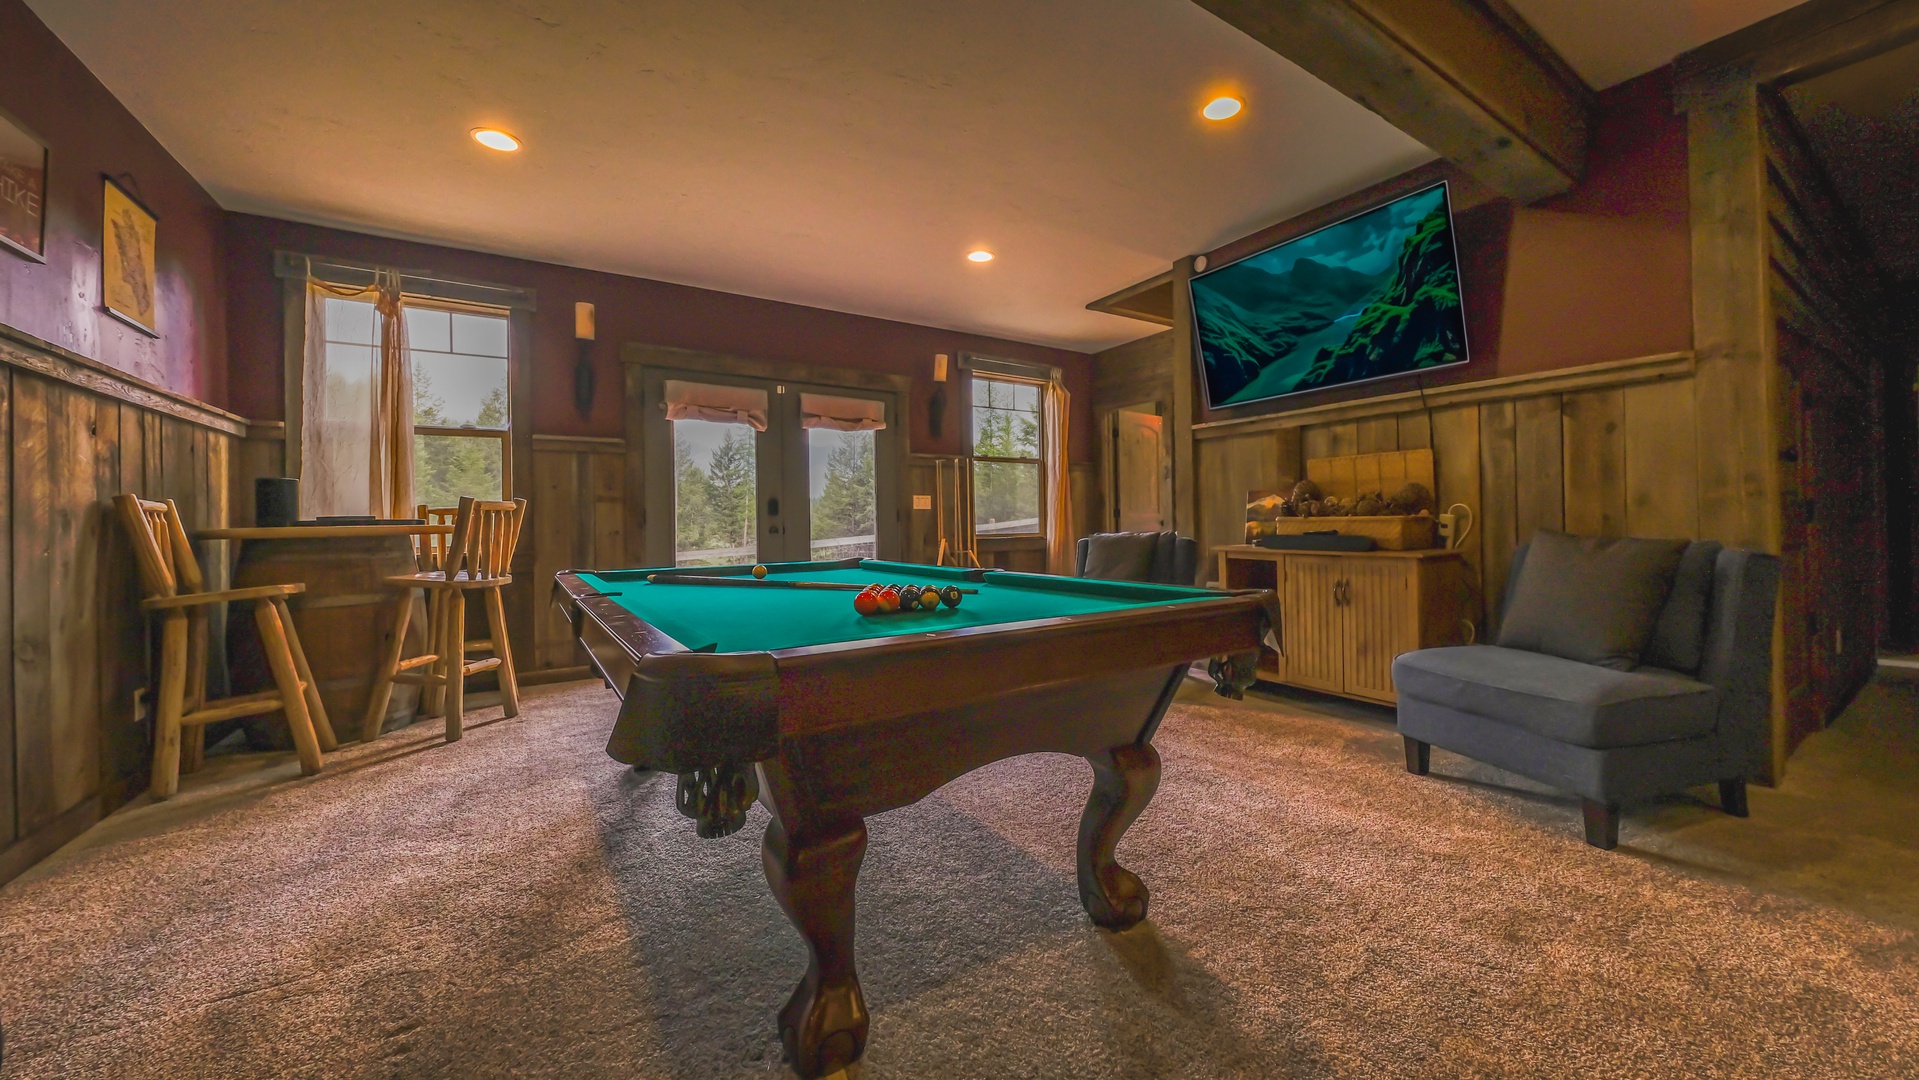 Fun and relaxation for everyone in the game room with pool table and TV